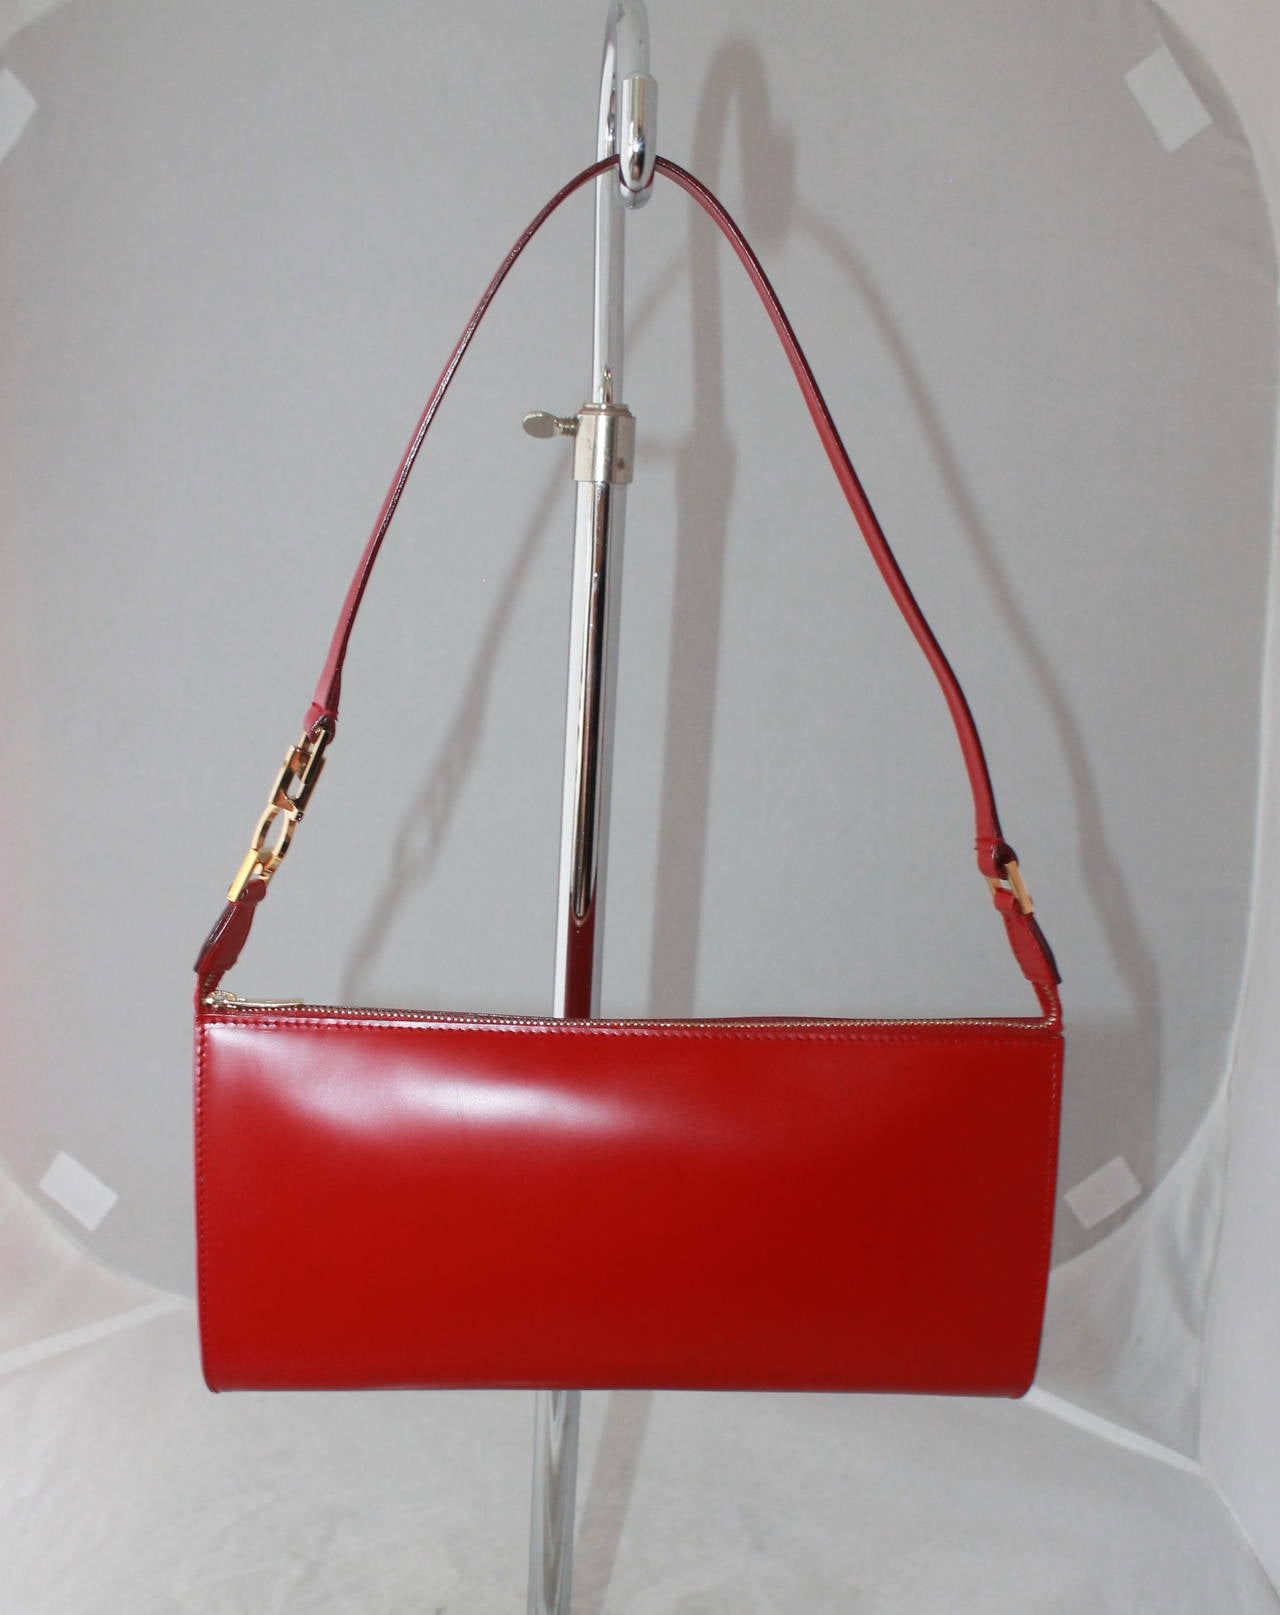 Salvatore Ferragamo Red Patent Pouchette GHW. This bag is in excellent condition and comes with a duster.

Height- 4.75